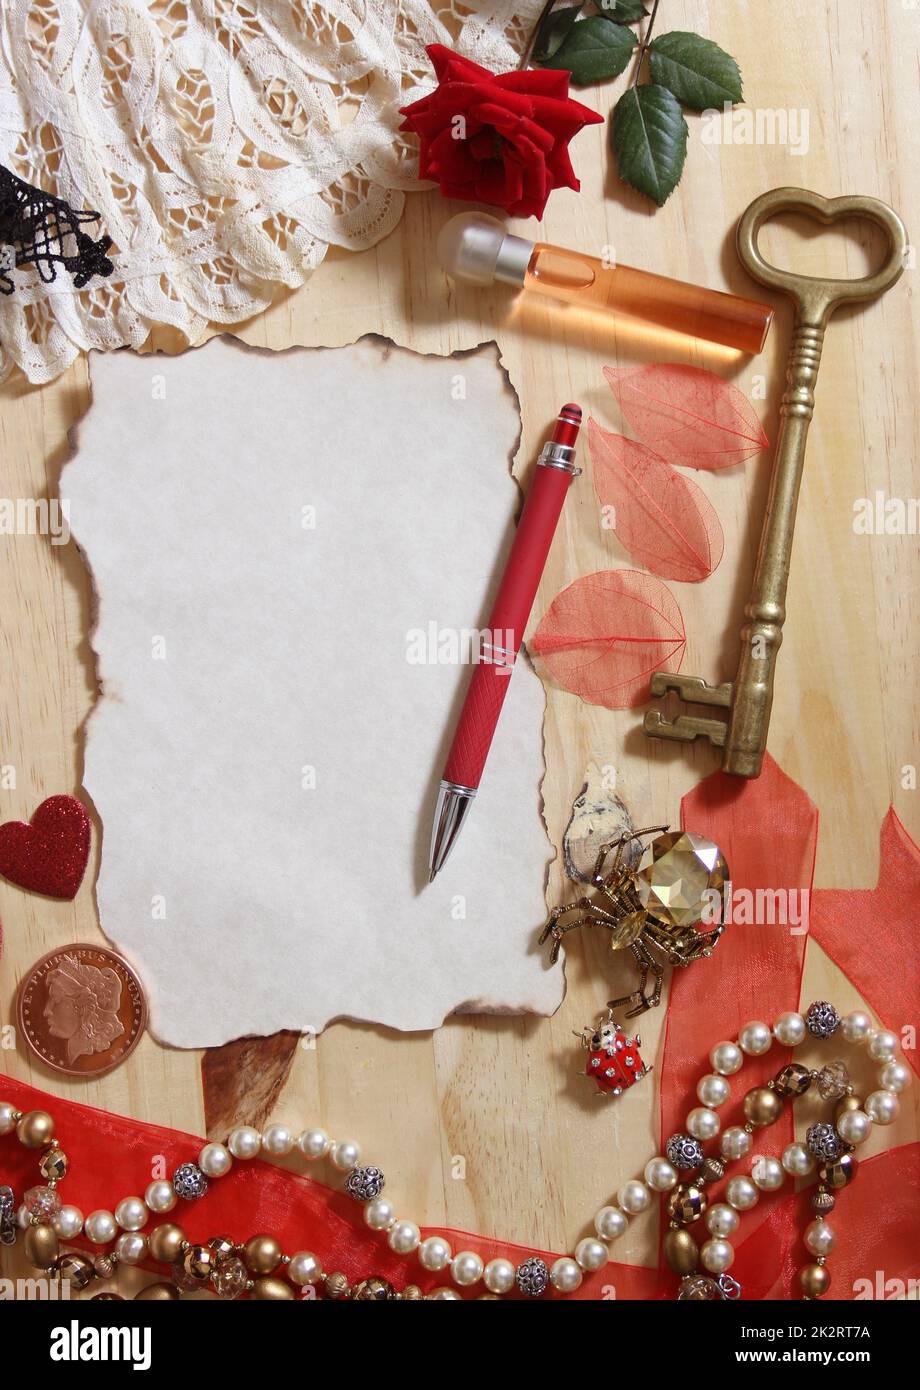 Vintage Jewelry and Lace With Antique Key on Wooden Background Stock Photo